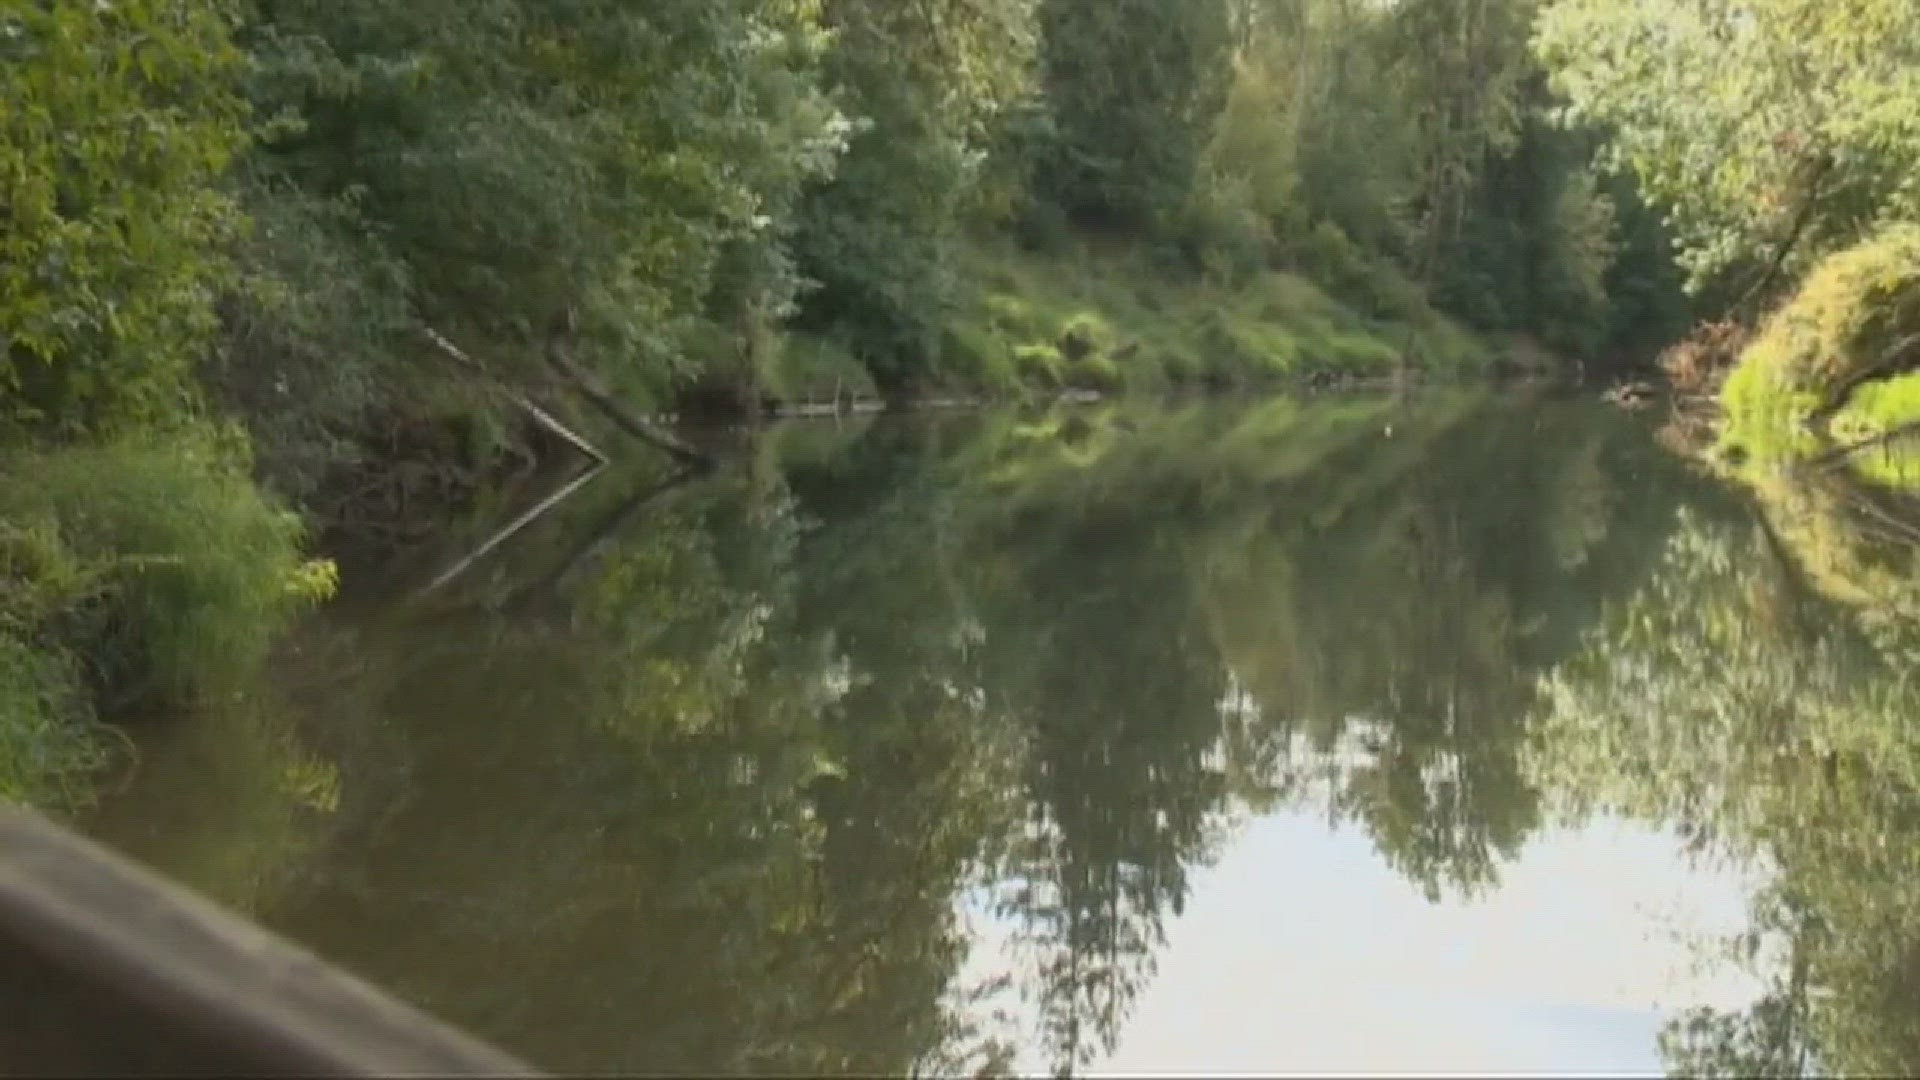 Conservation group buys 286 acres along Tualatin River